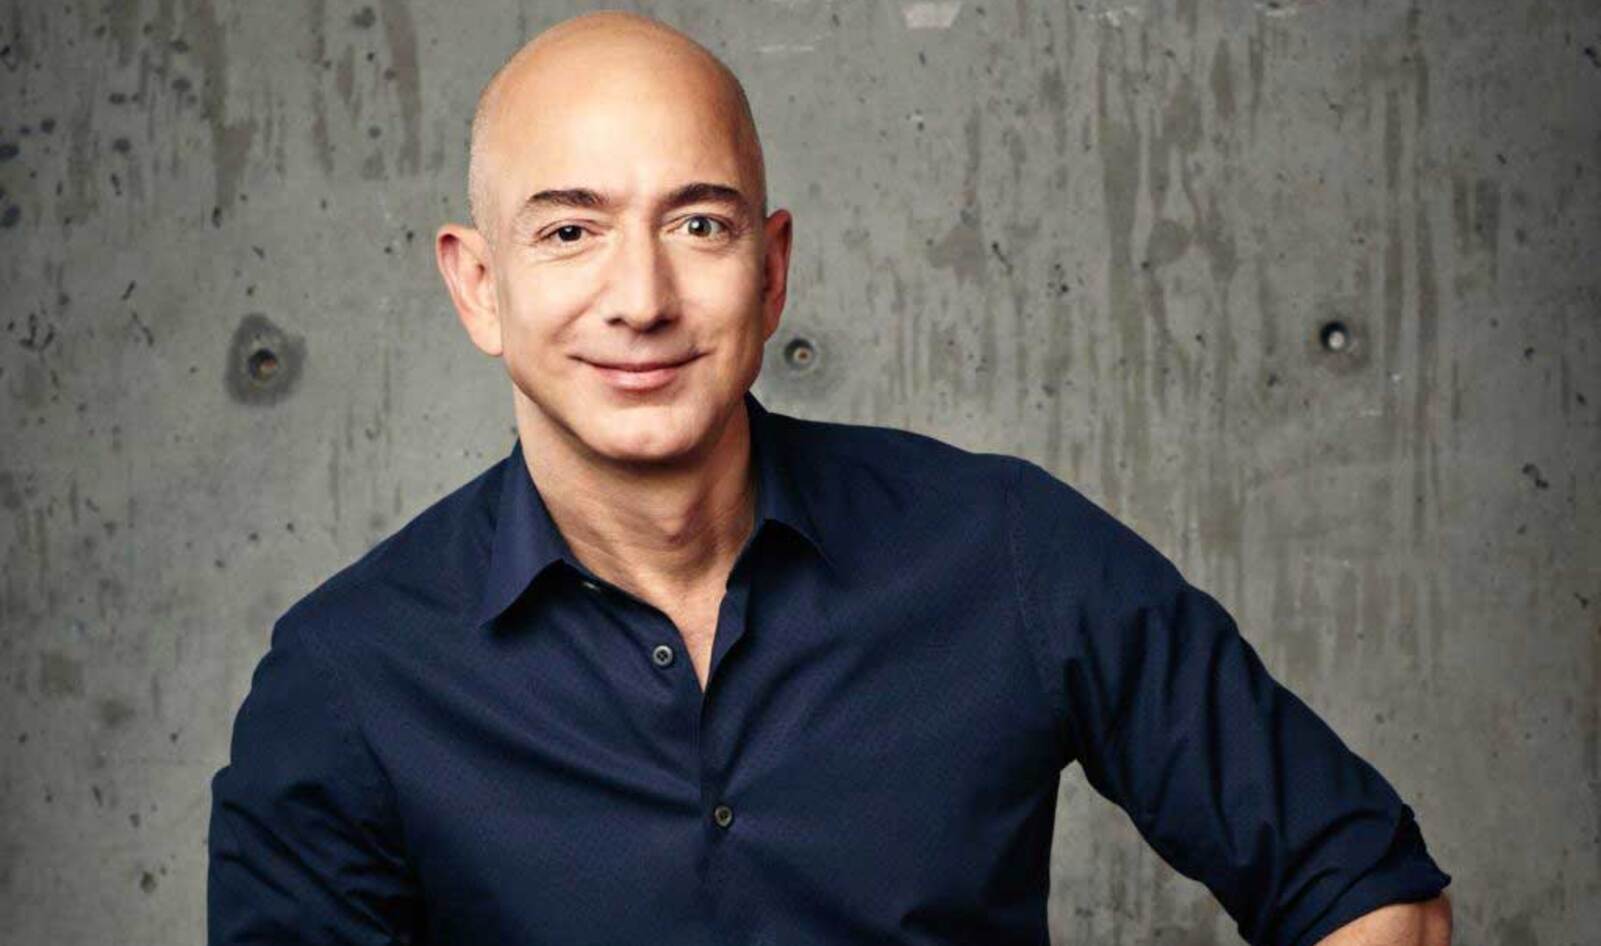 Jeff Bezos Is Giving $10 Billion to Companies Fighting Climate Change&nbsp;